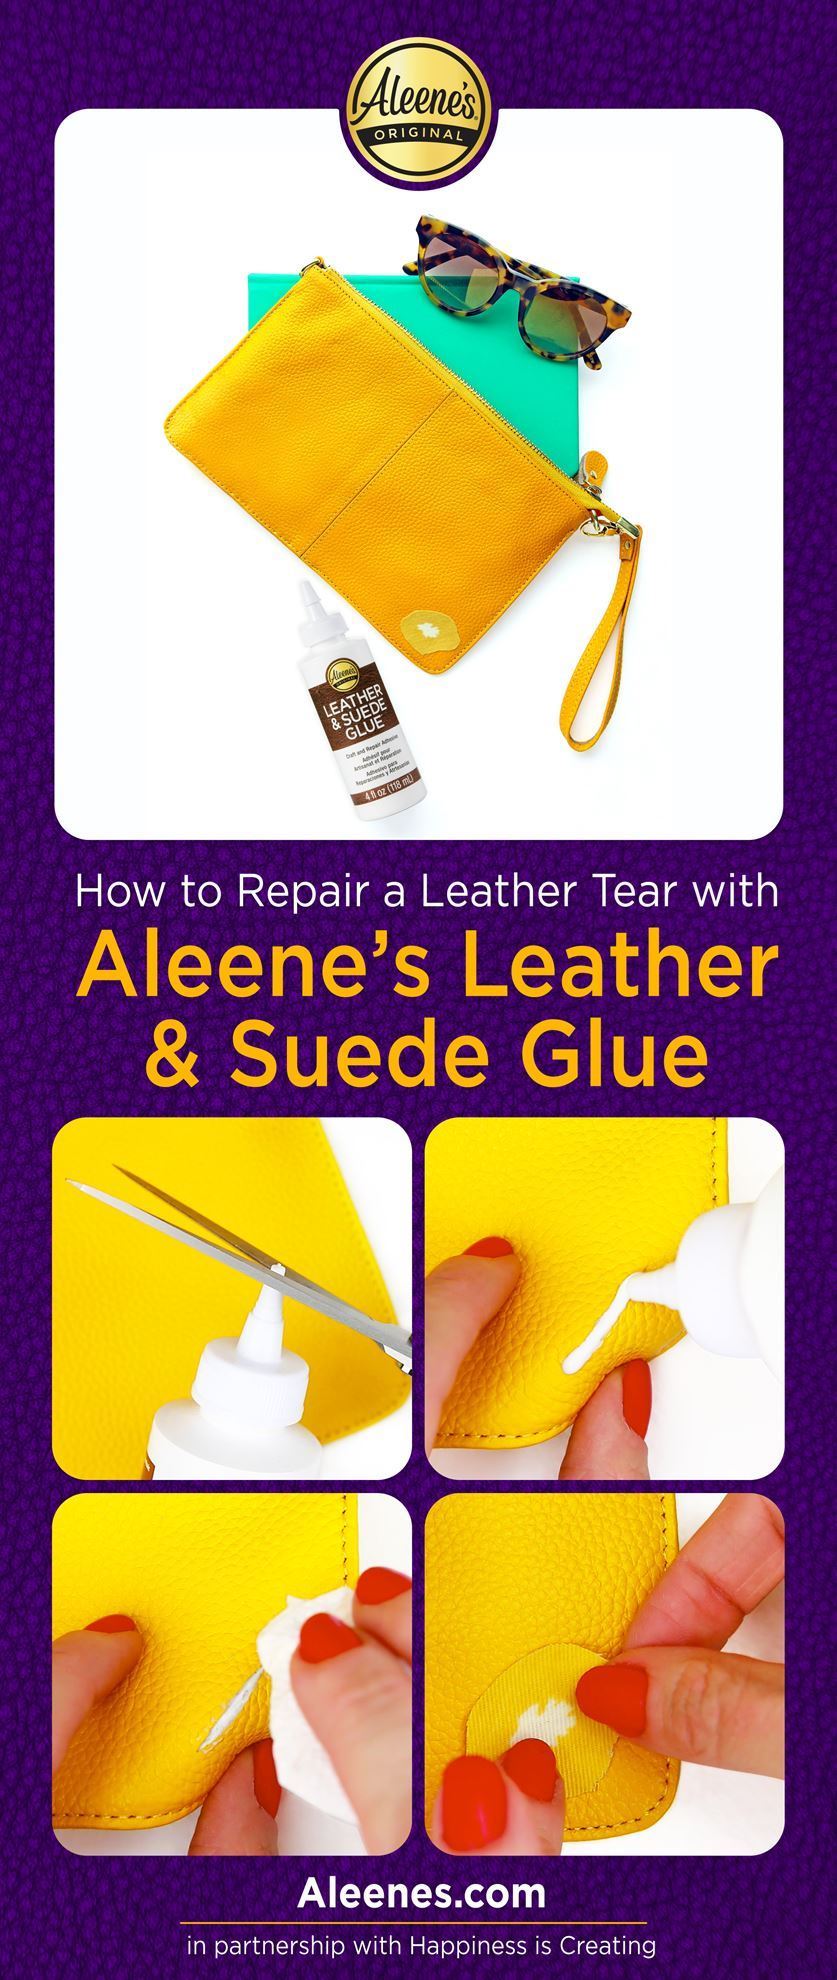 Leather Glue Adhesive - Aleenes Leather Fabric Glue for Patches, Upholstery, Tears, Canvas, Clothing, Leather Punch Pen Tool with 6 Replacement Tips